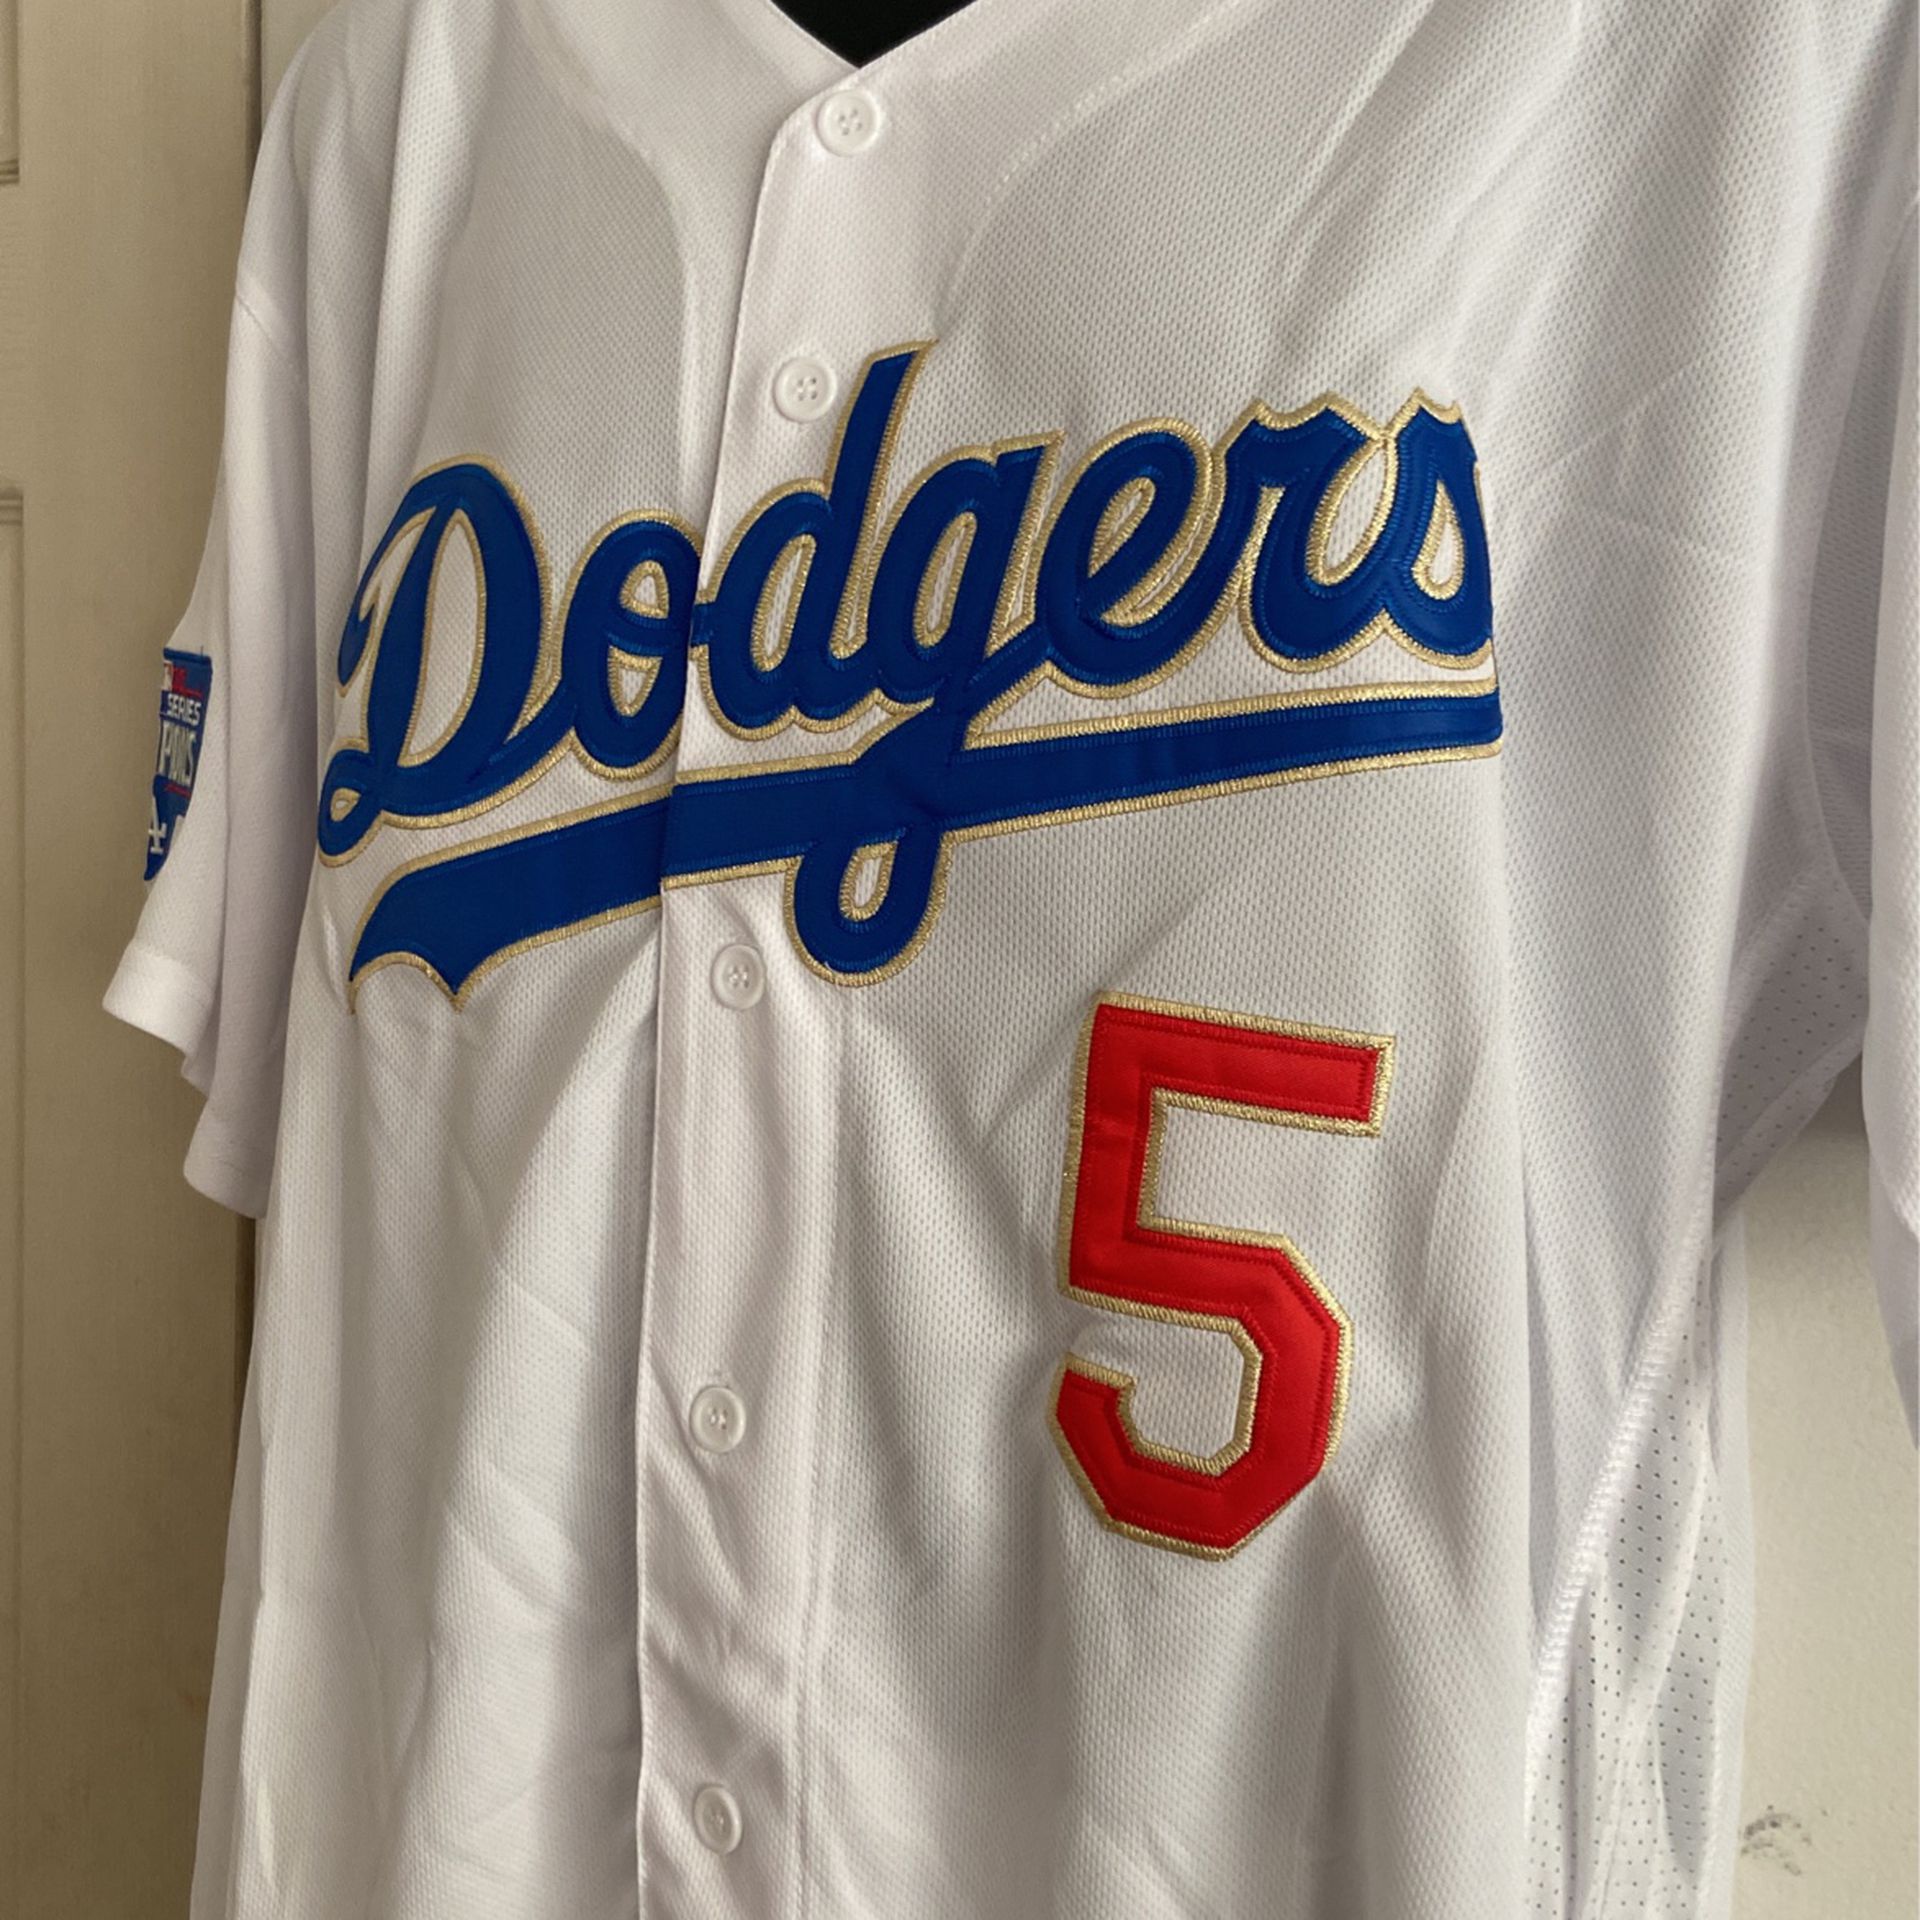 Dodgers Seager jersey m/l for Sale in Cypress, CA - OfferUp